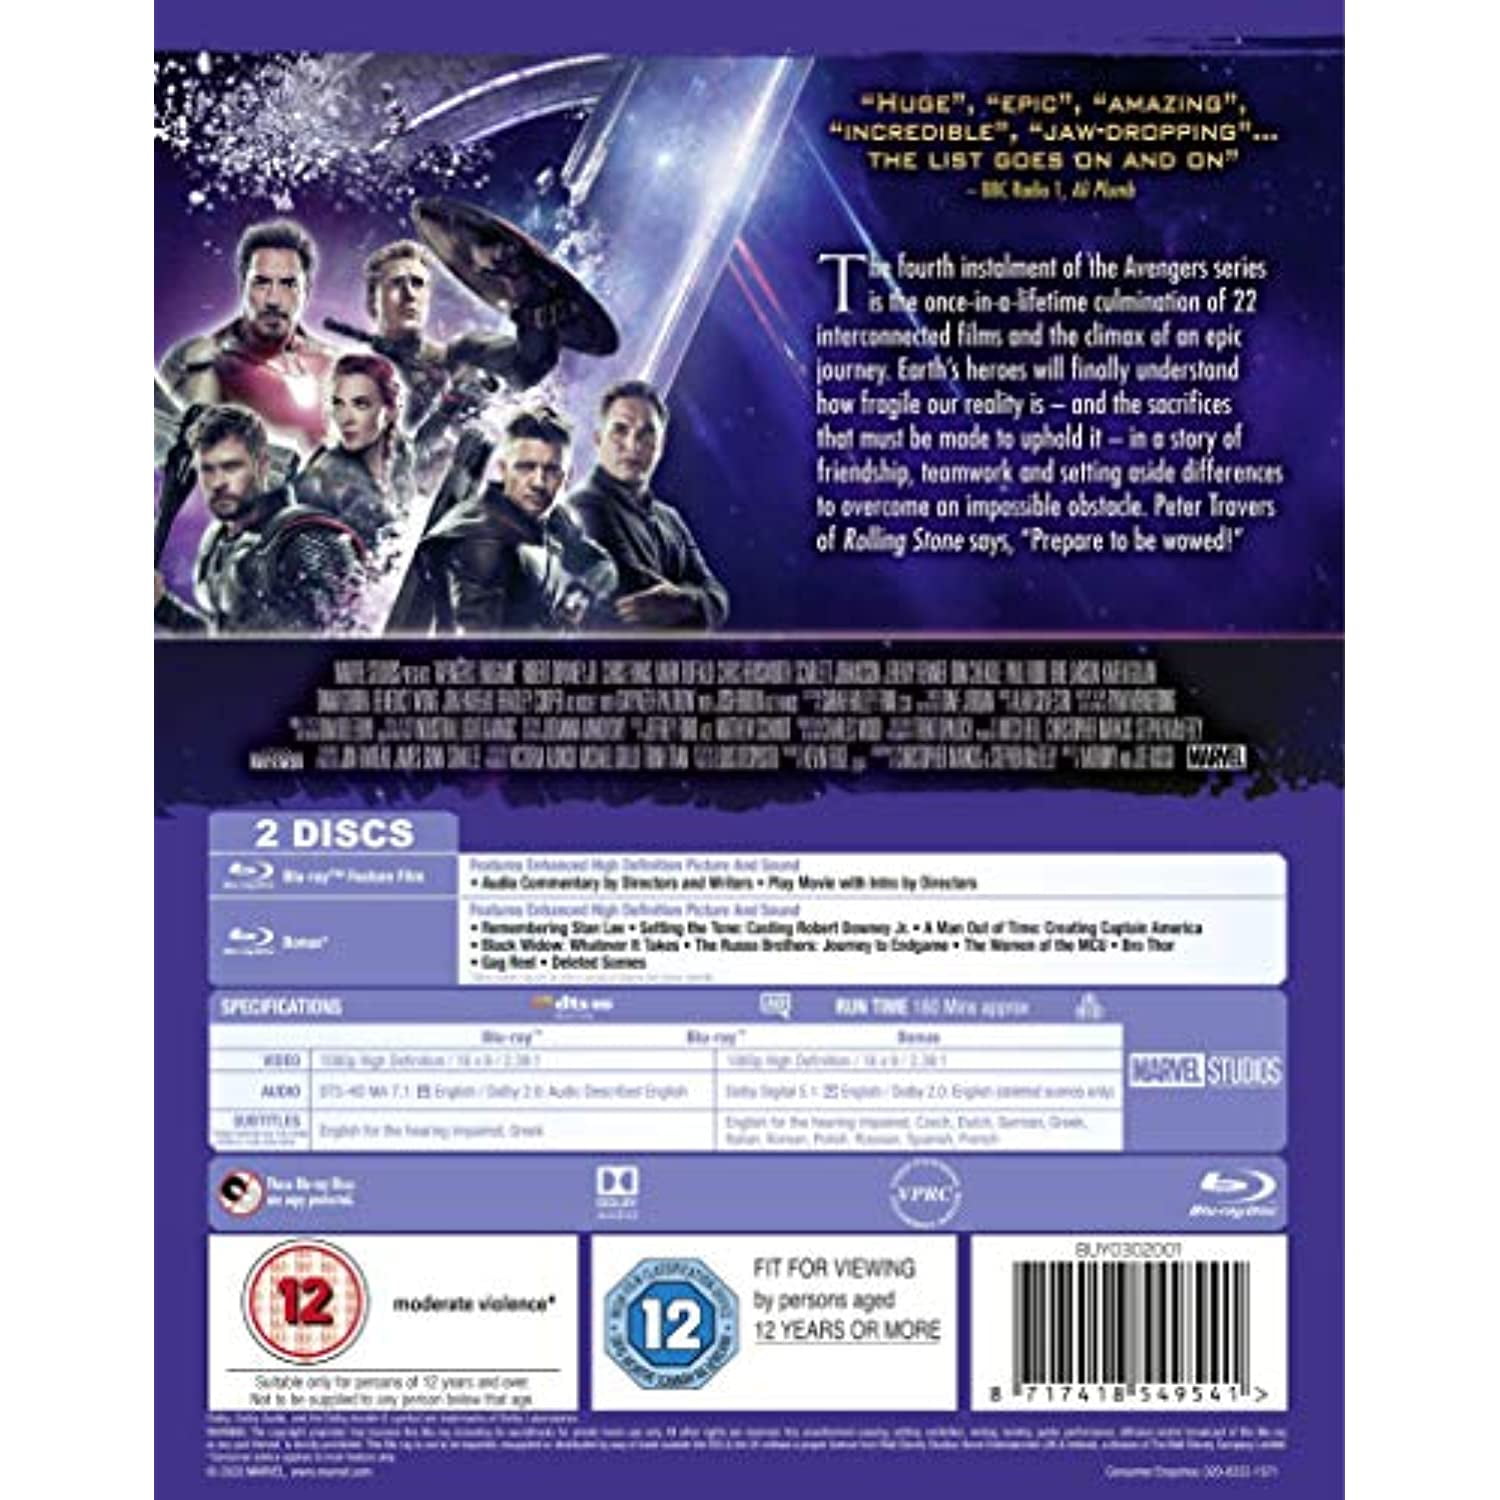 Avengers: Endgame for Rent, & Other New Releases on DVD, Blu-ray